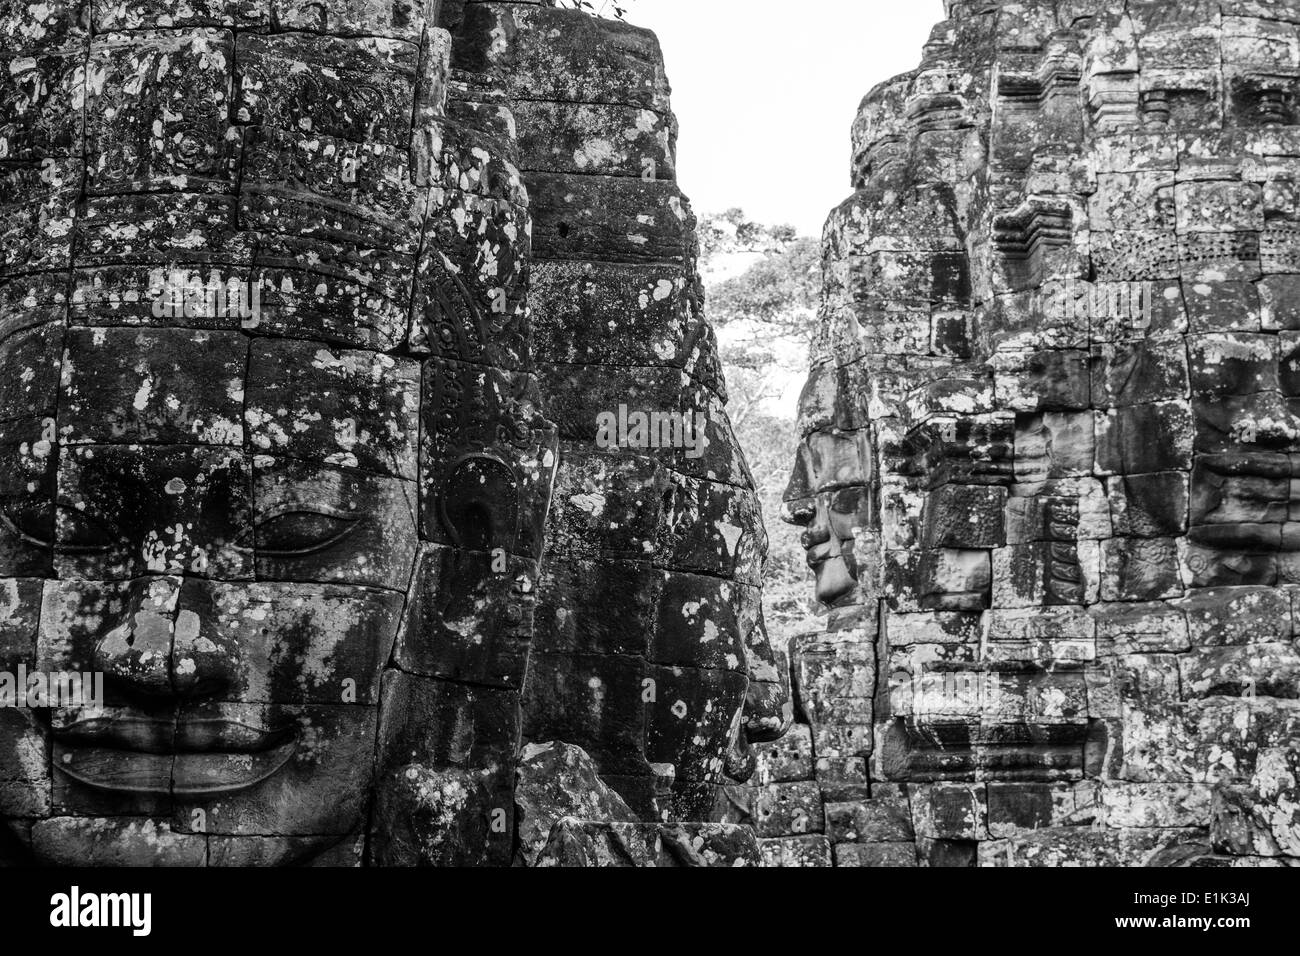 The Bayon is a temple in Angkor Thom, Angkor, Siem Reap, Cambodia. Its key feature are the 216 gigantic stone smiling faces. Stock Photo